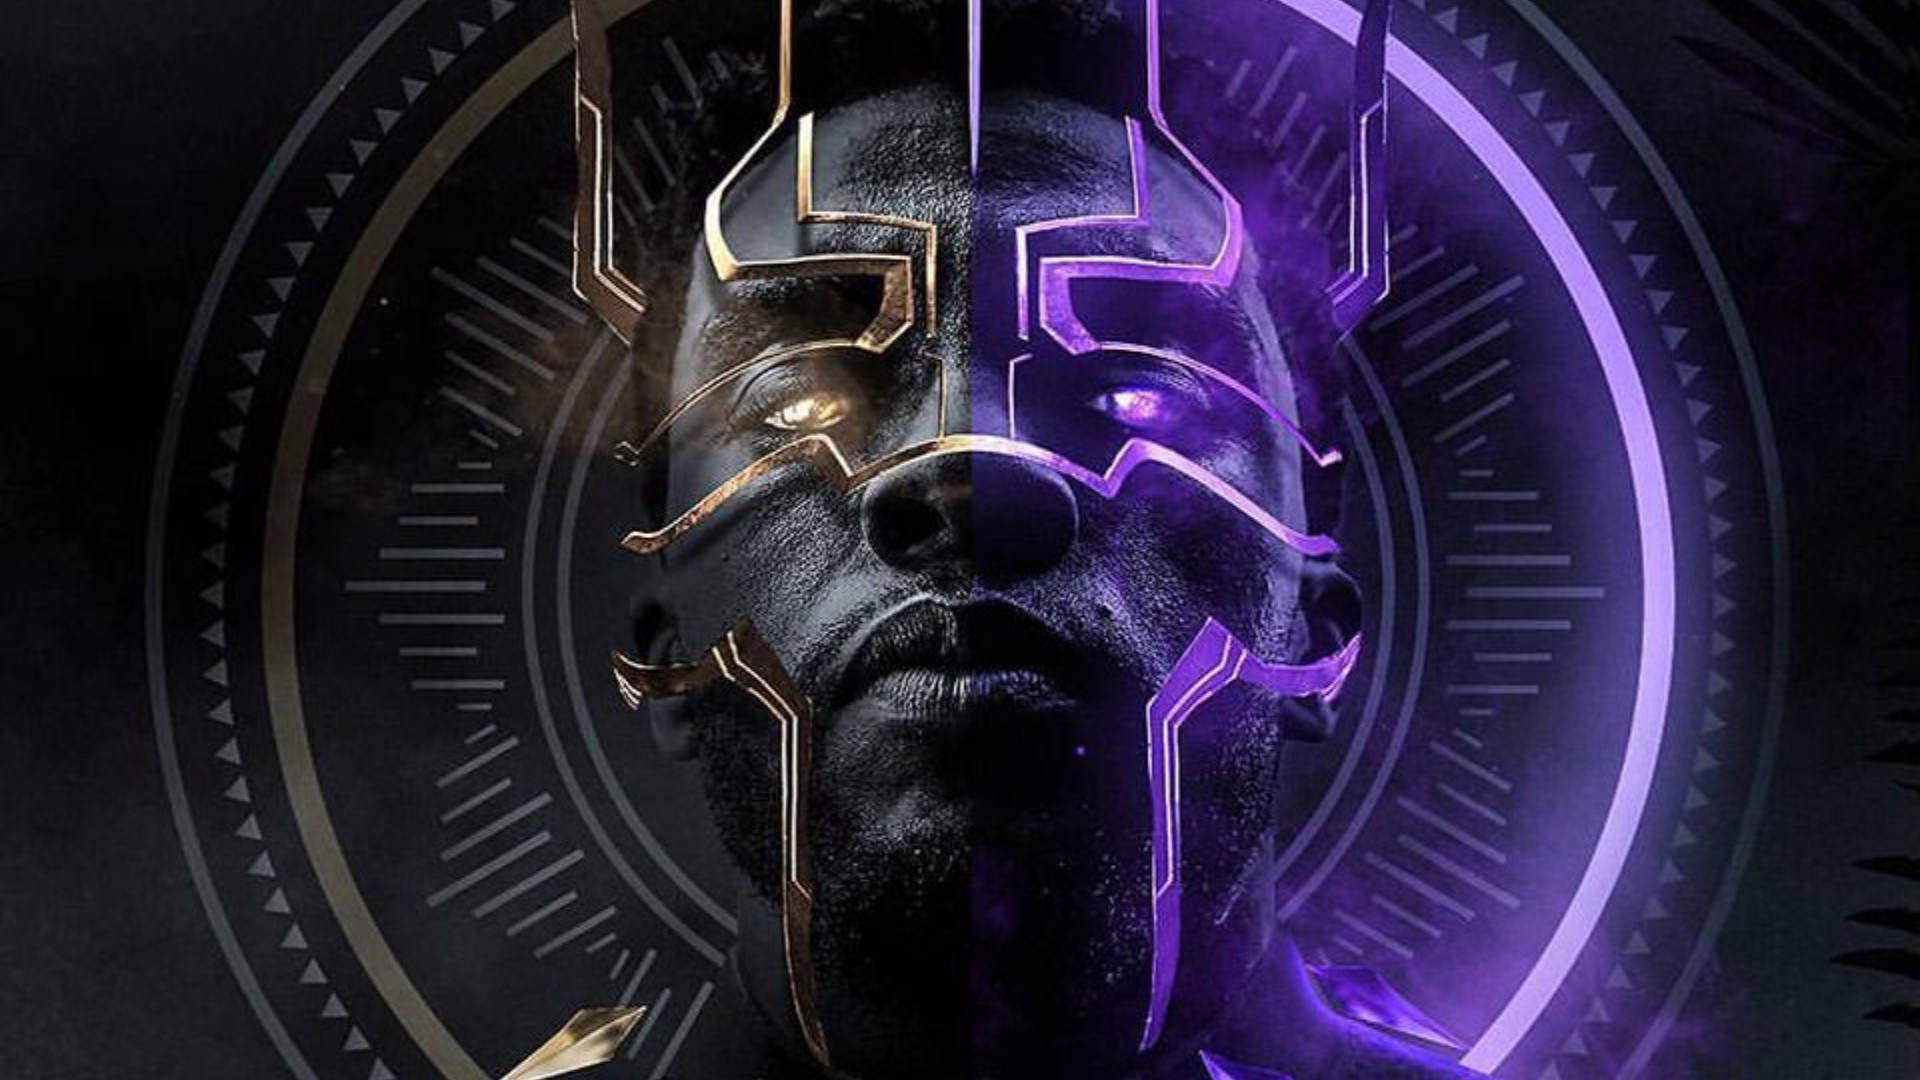 Black Panther 2 Wallpapers - Top 45 Best Black Panther 2 Wallpapers Download